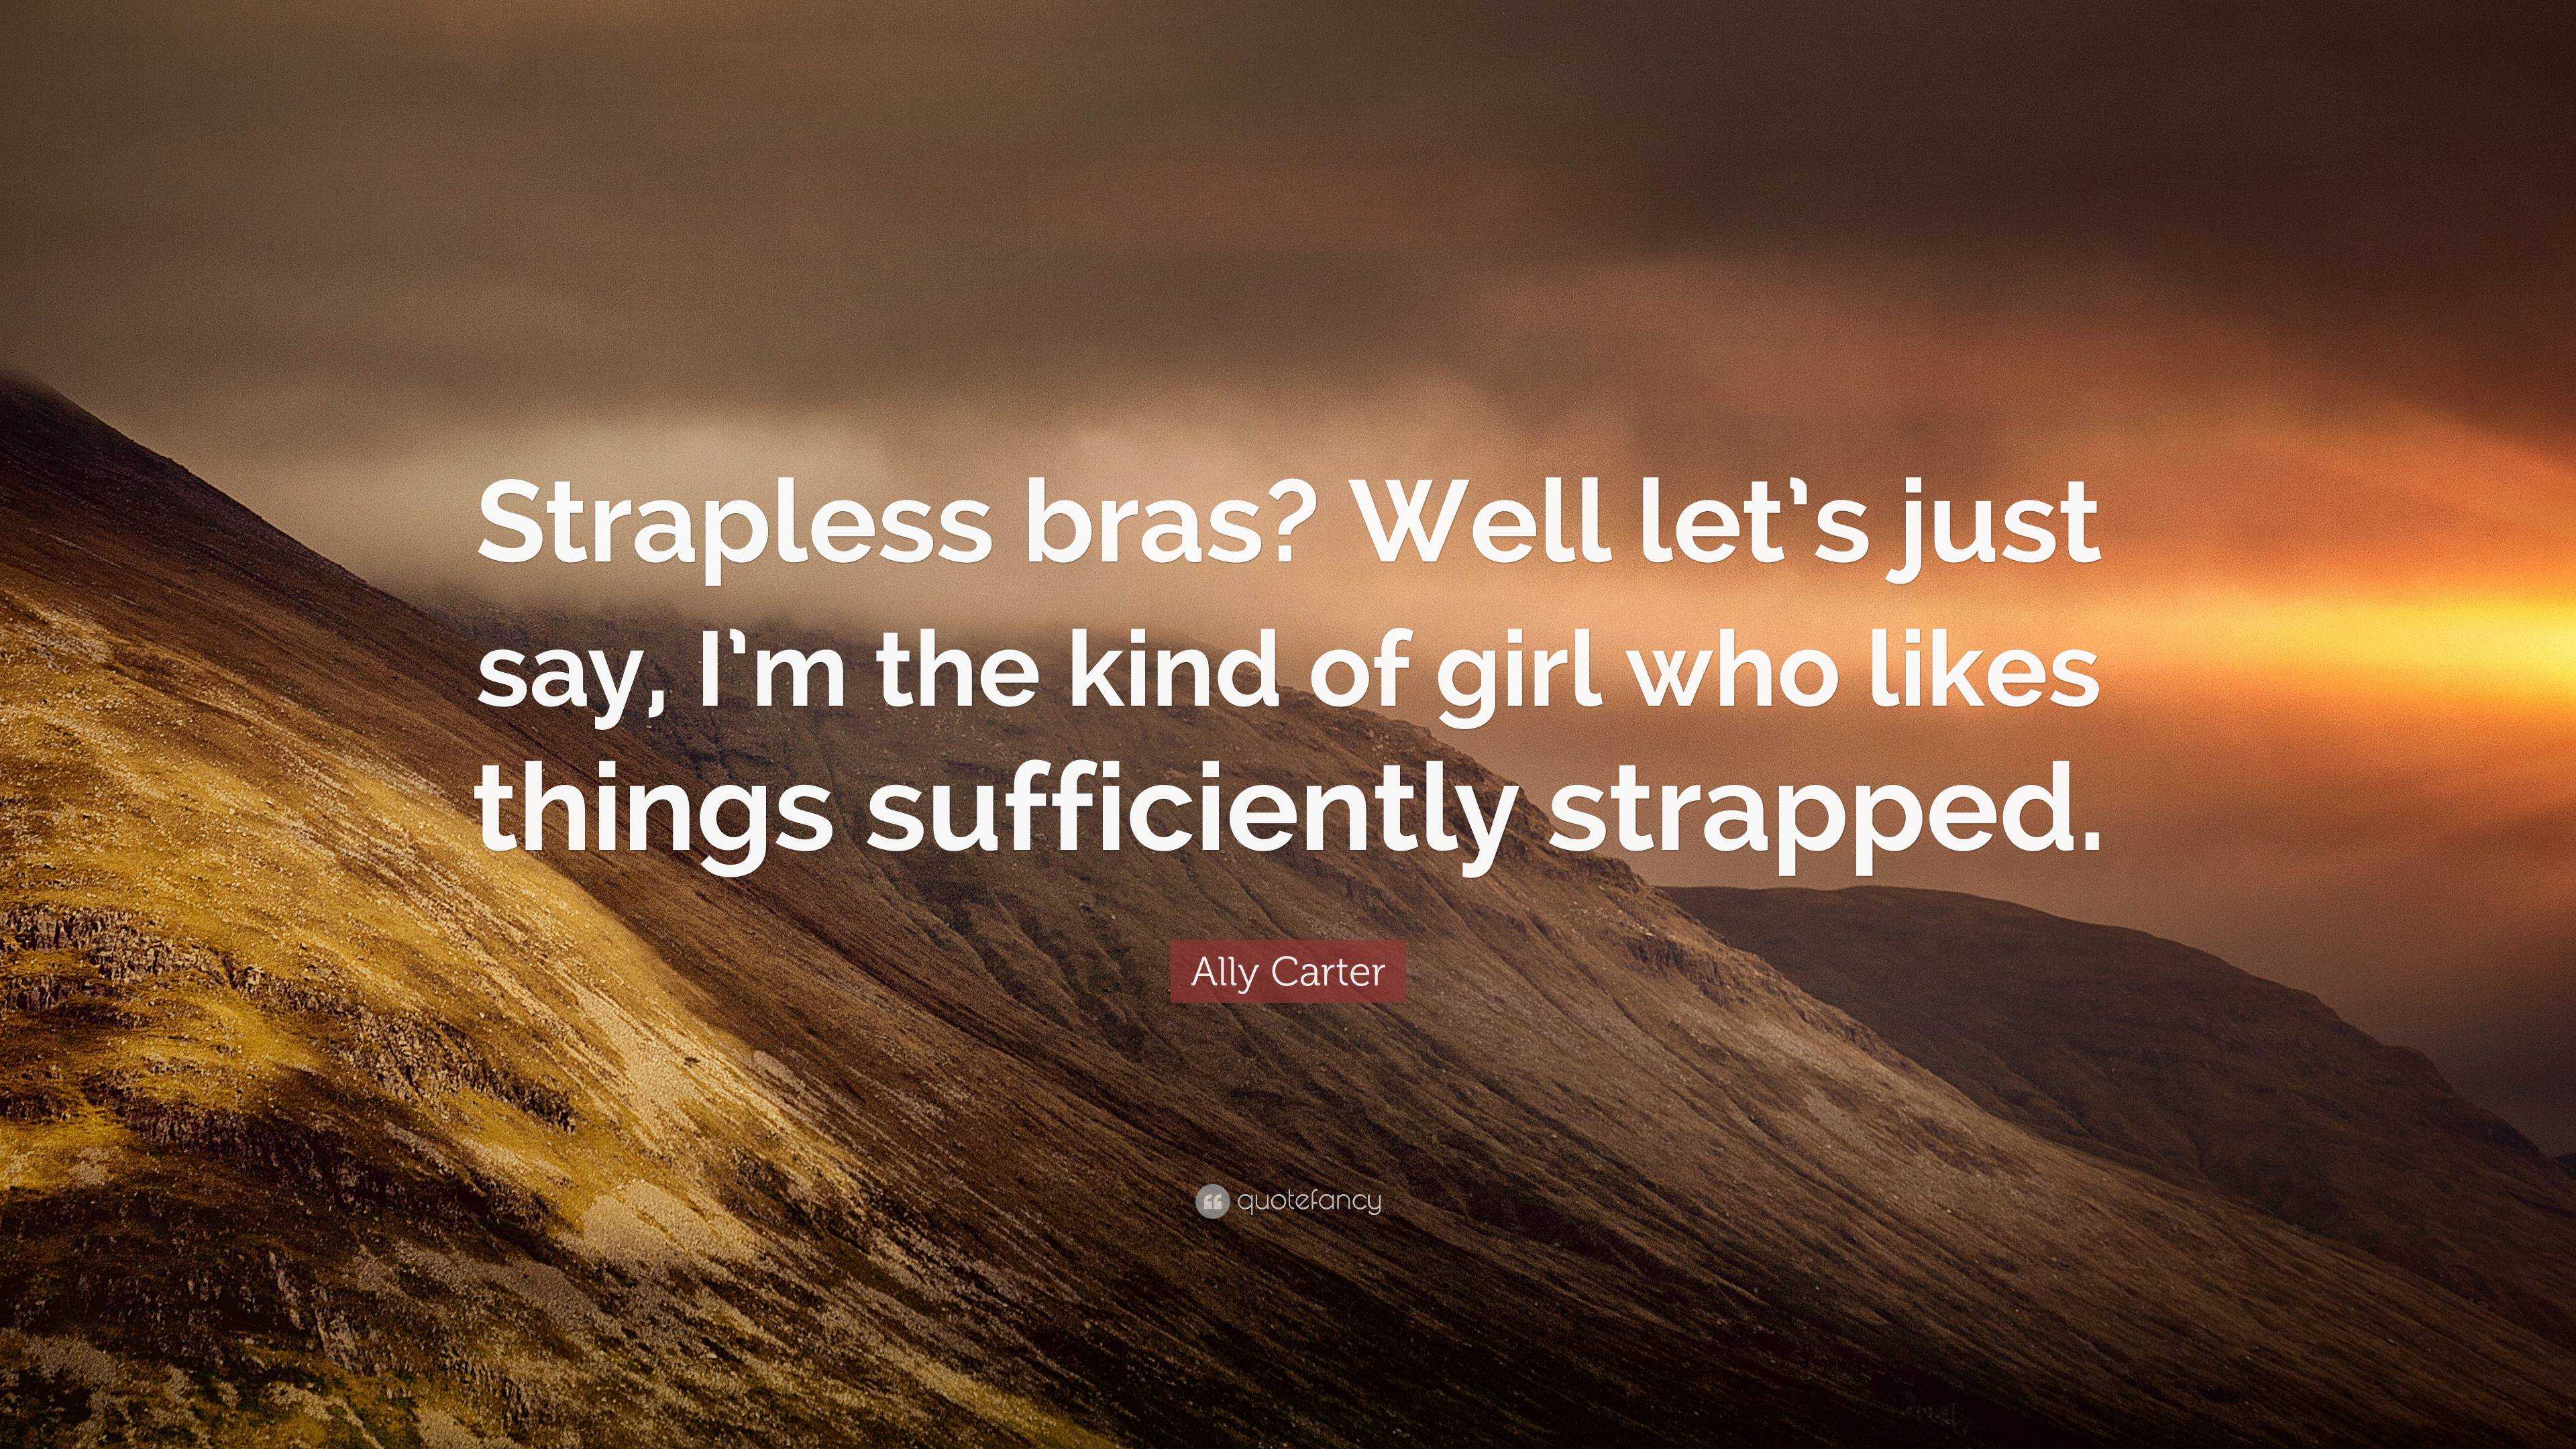 https://quotefancy.com/media/wallpaper/3840x2160/6846370-Ally-Carter-Quote-Strapless-bras-Well-let-s-just-say-I-m-the-kind.jpg